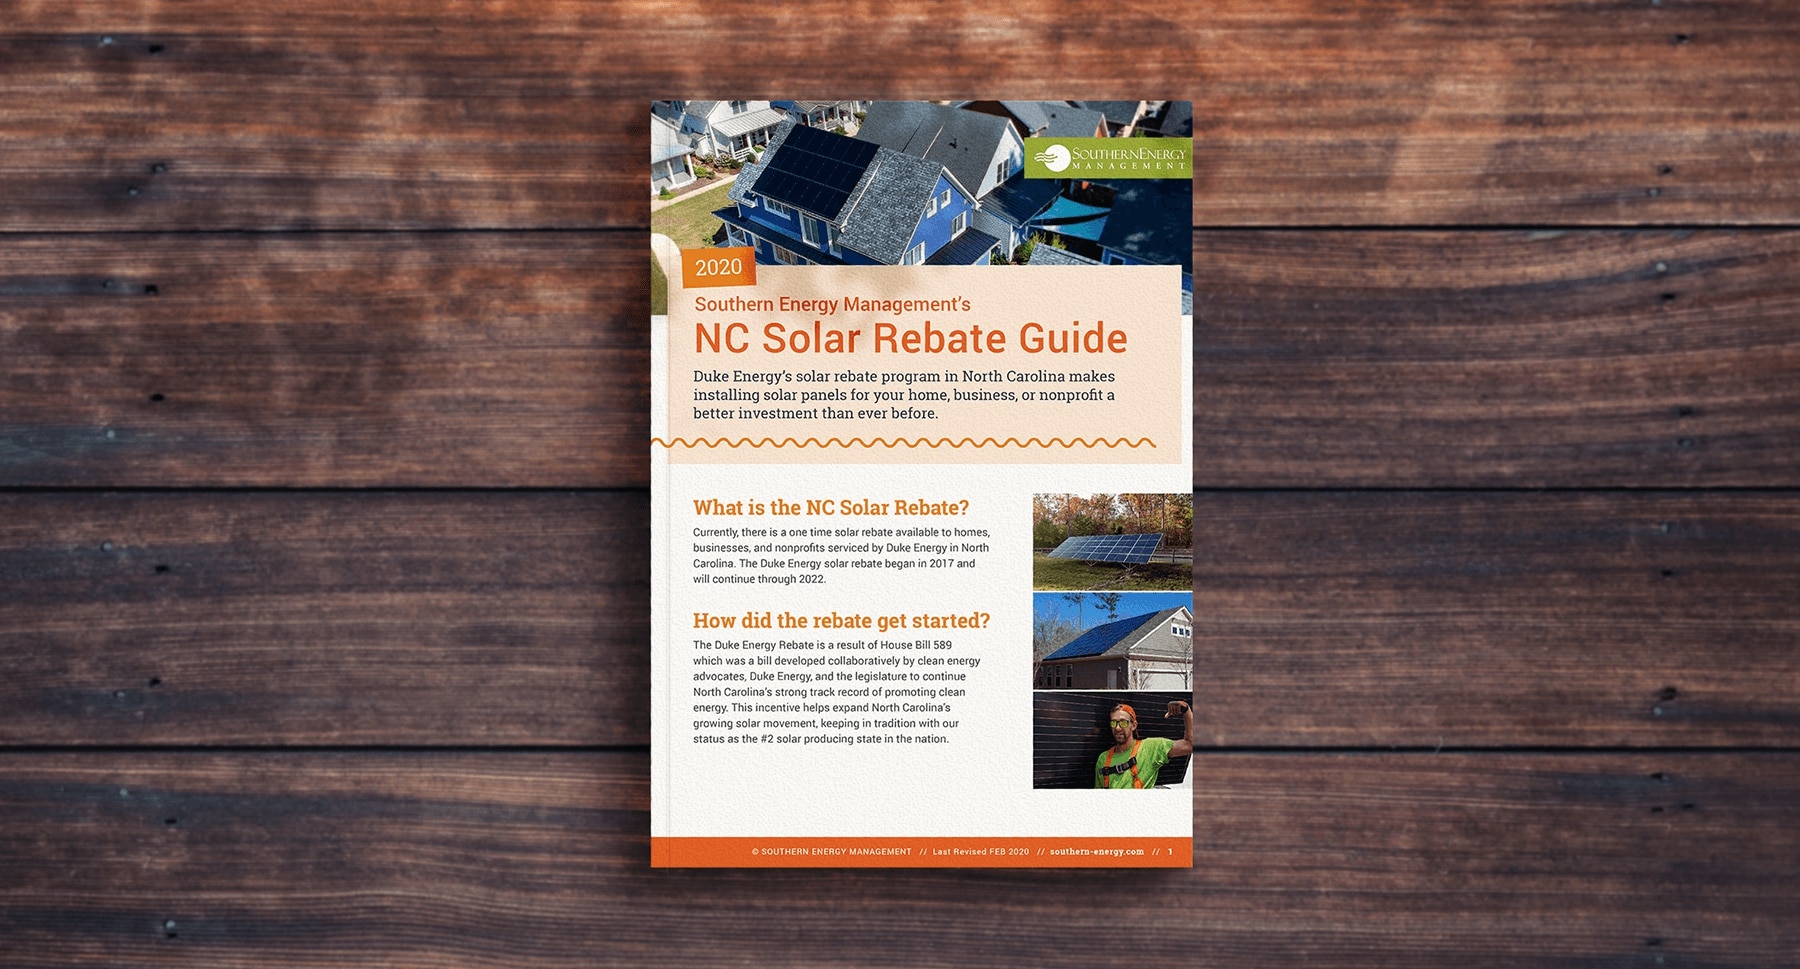 download-your-copy-of-the-nc-solar-rebate-guide-southern-energy